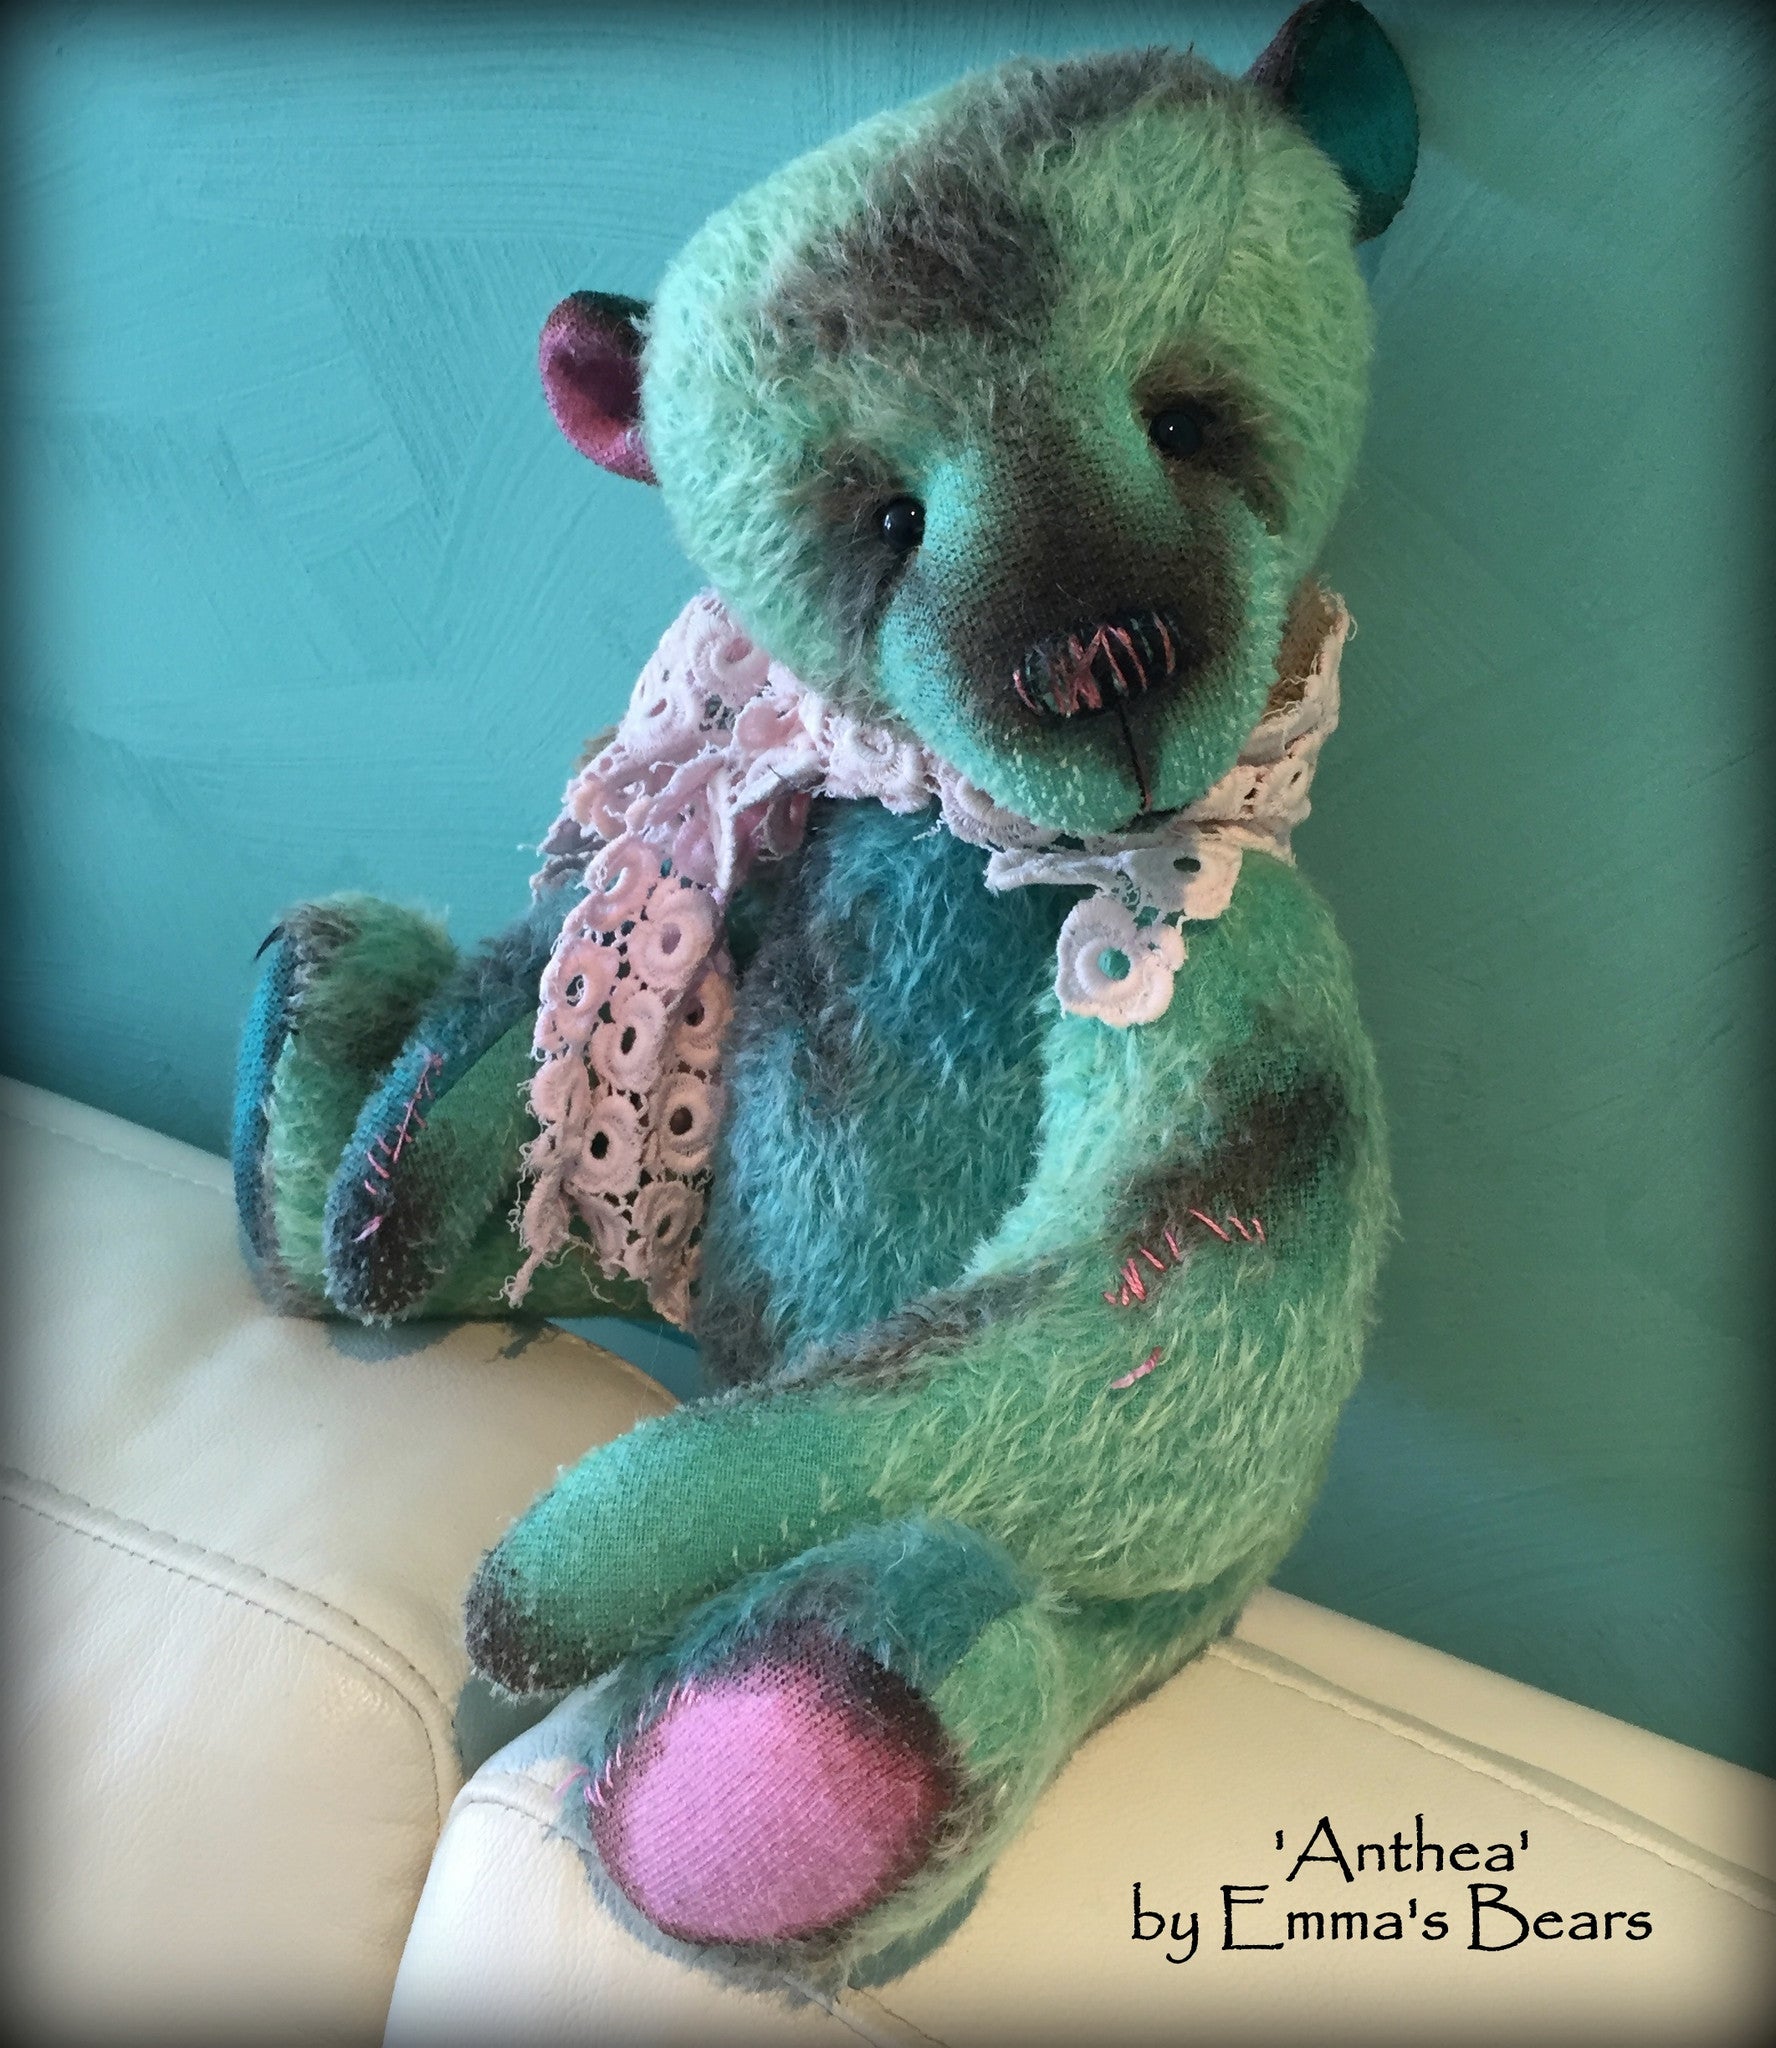 Anthea - 17IN hand dyed antique style mohair bear by Emmas Bears - OOAK